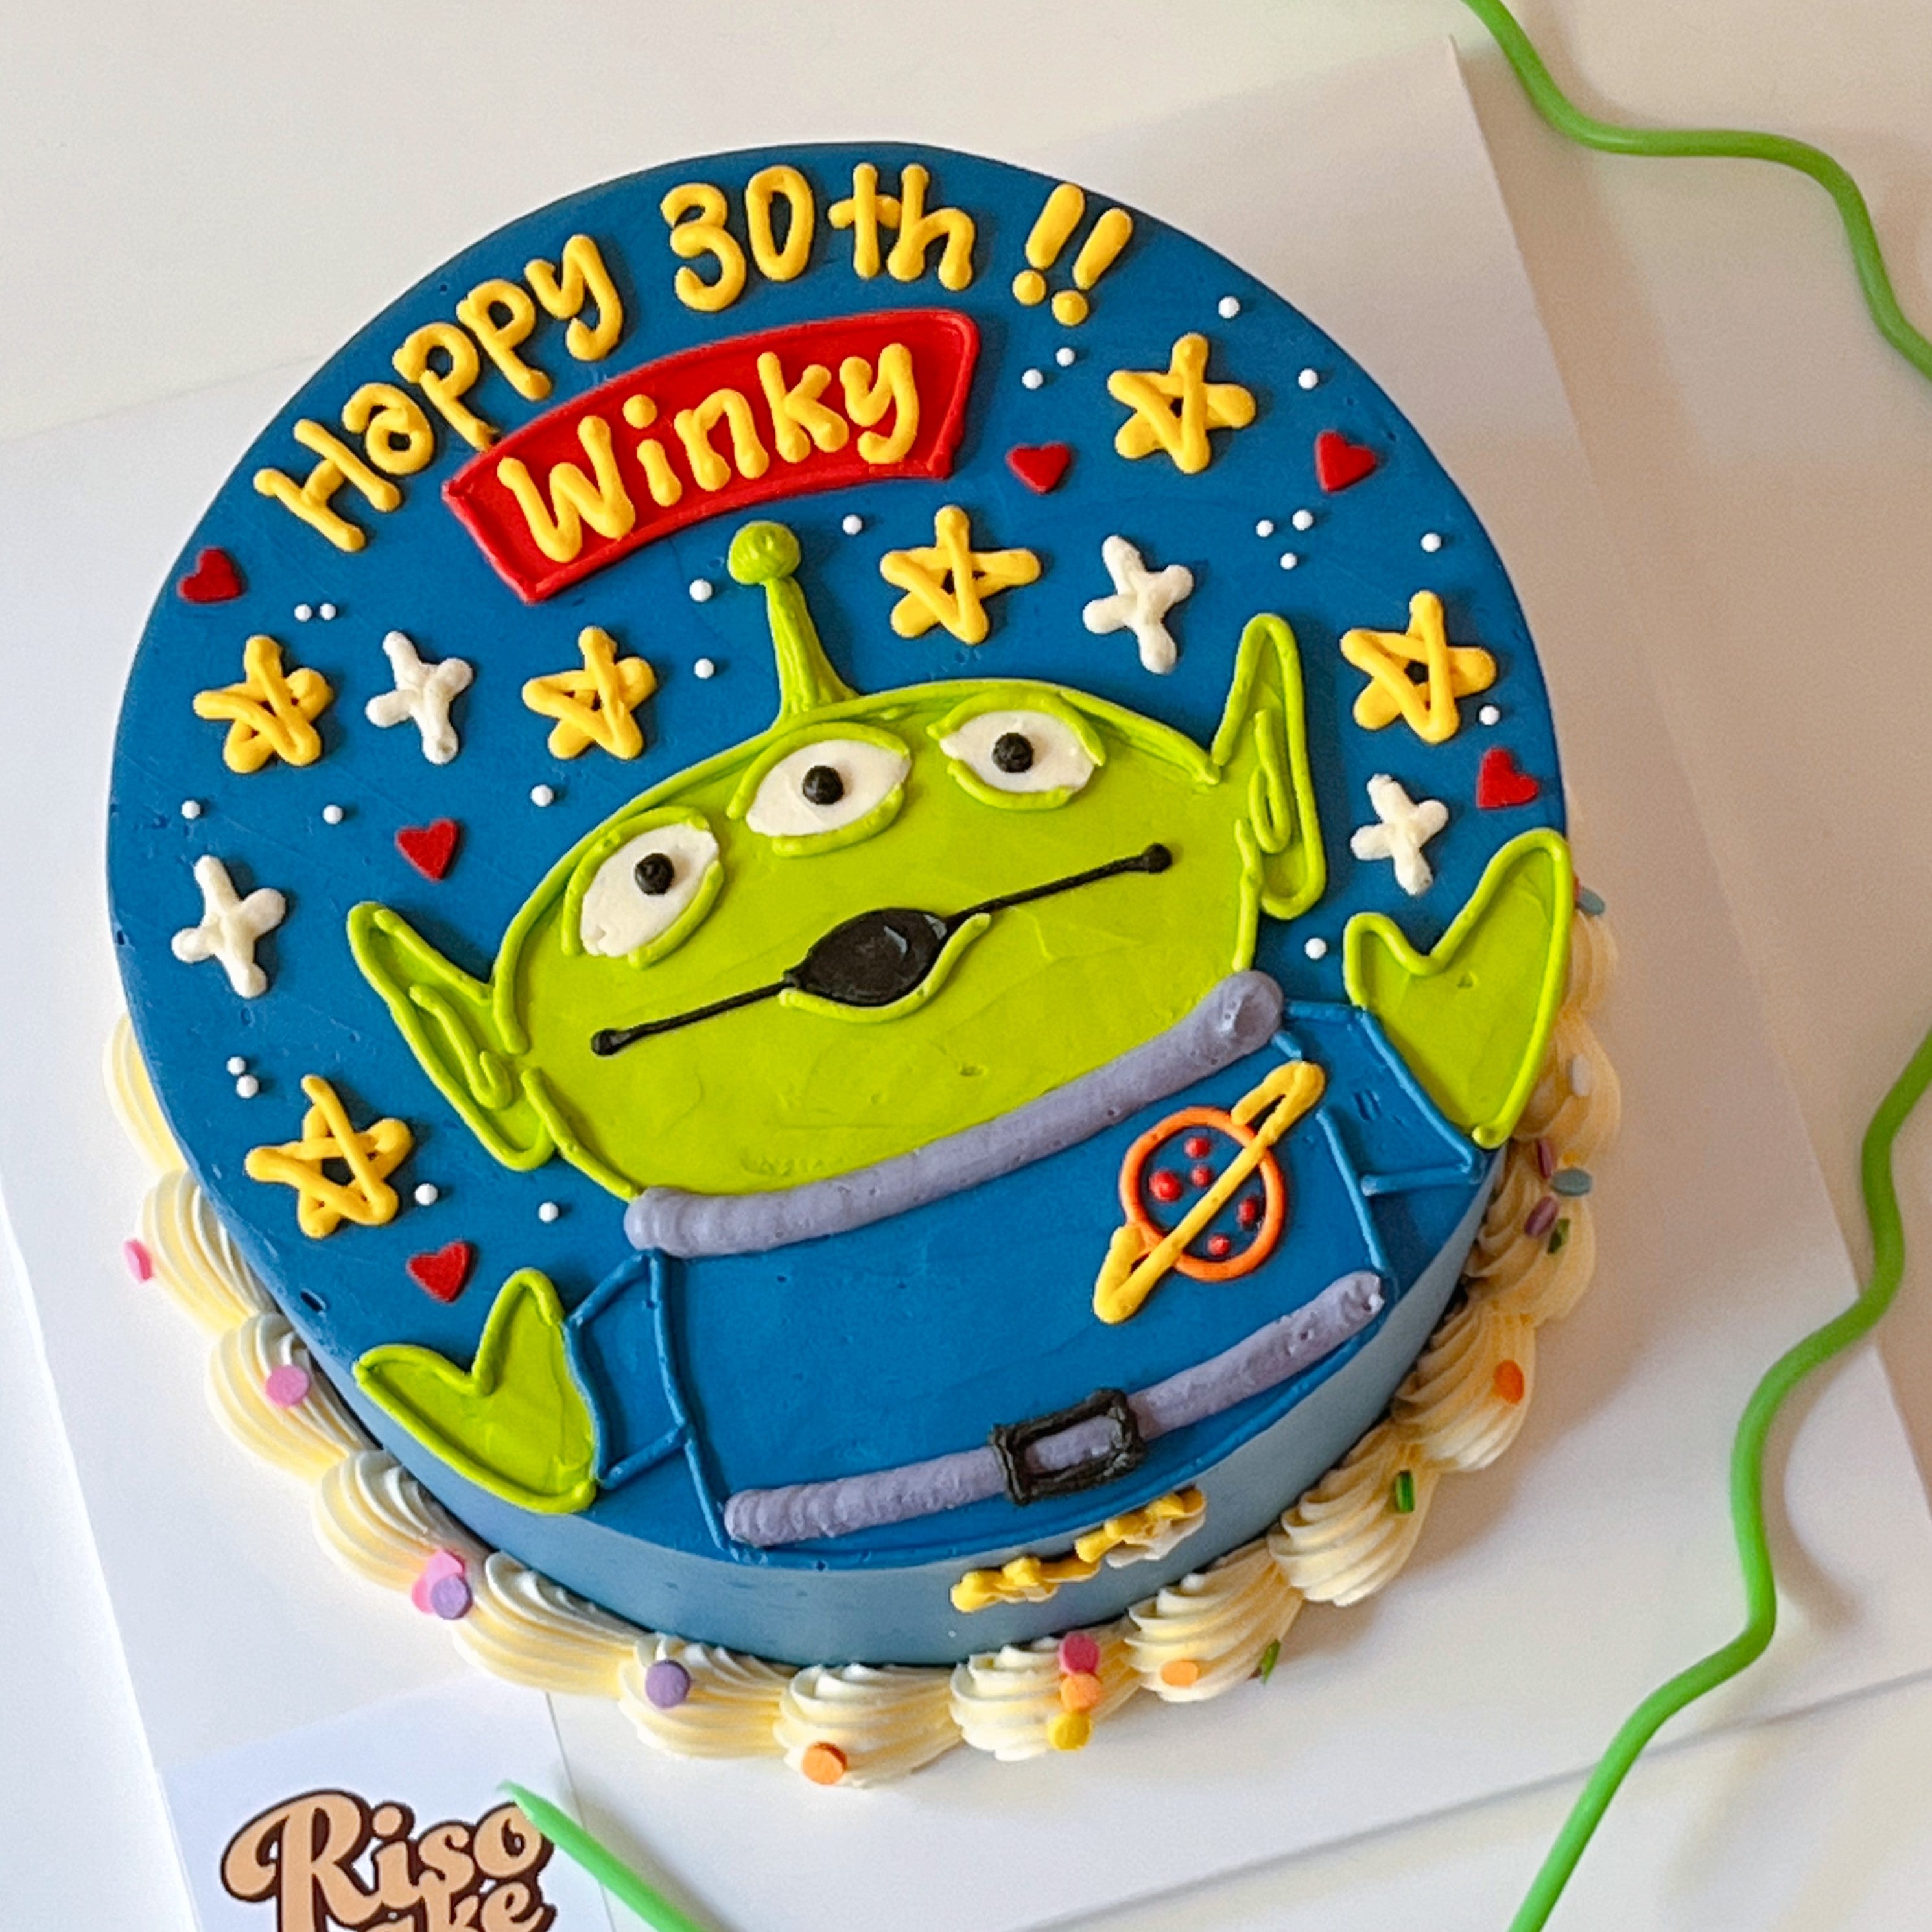 Toy Story Birthday Cake Topper Set Featuring Buzz Lightyear and Alien BRAND  NEW | eBay